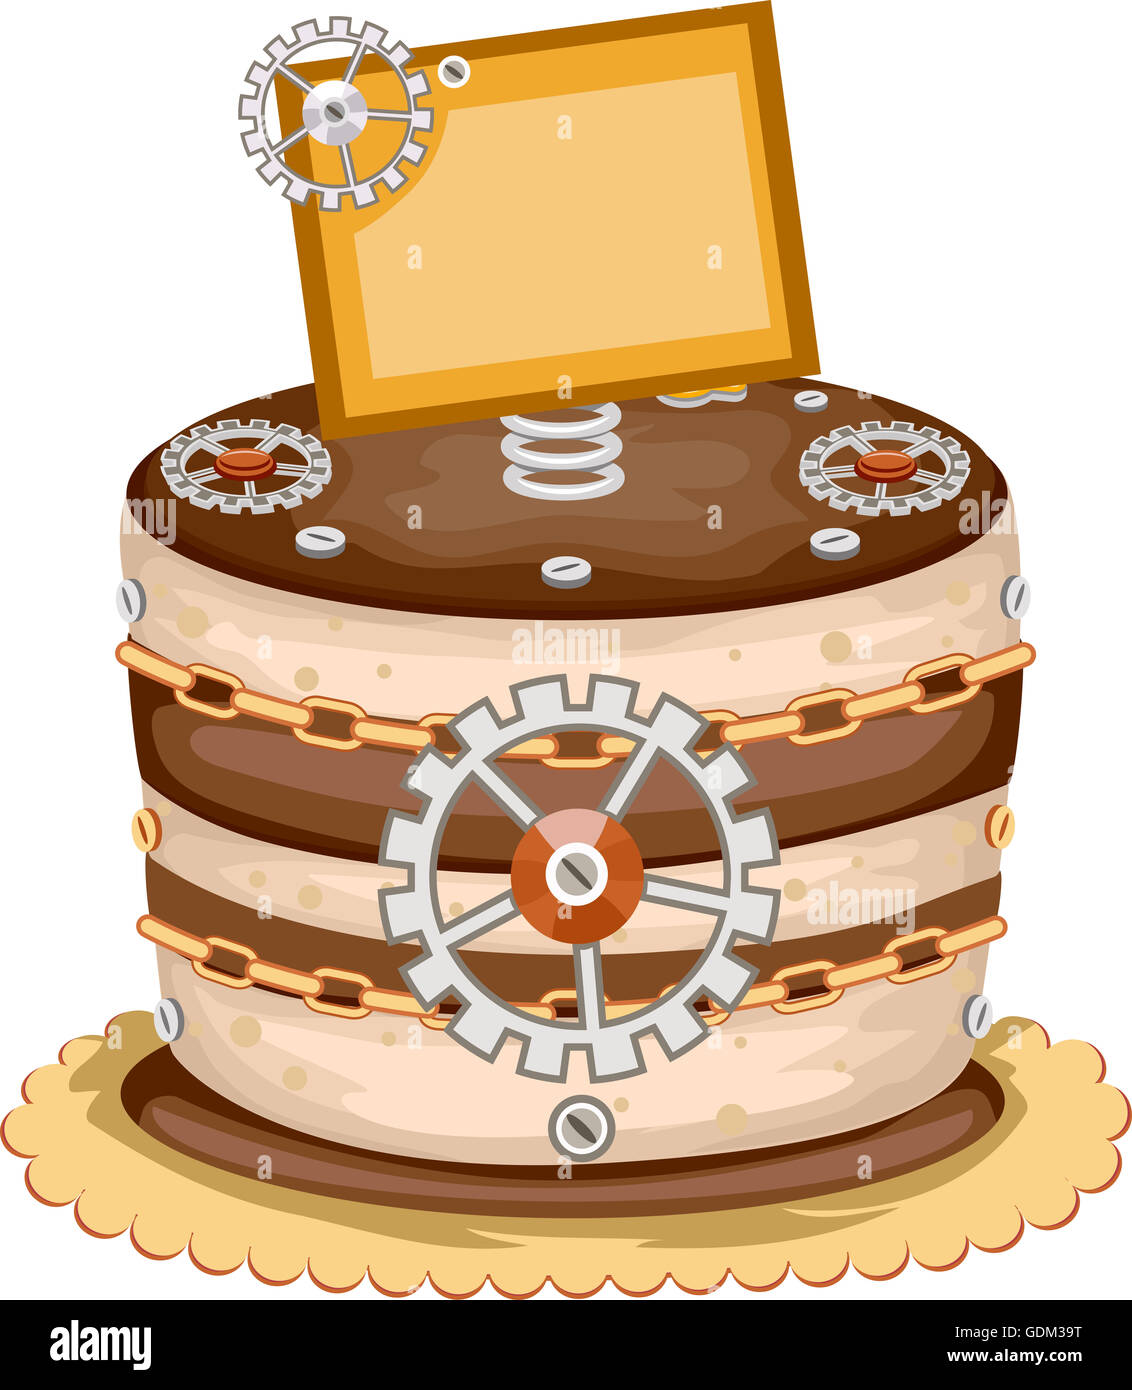 Illustration of an Appetizing Cake Decorated With Gears and Wheels Stock Photo